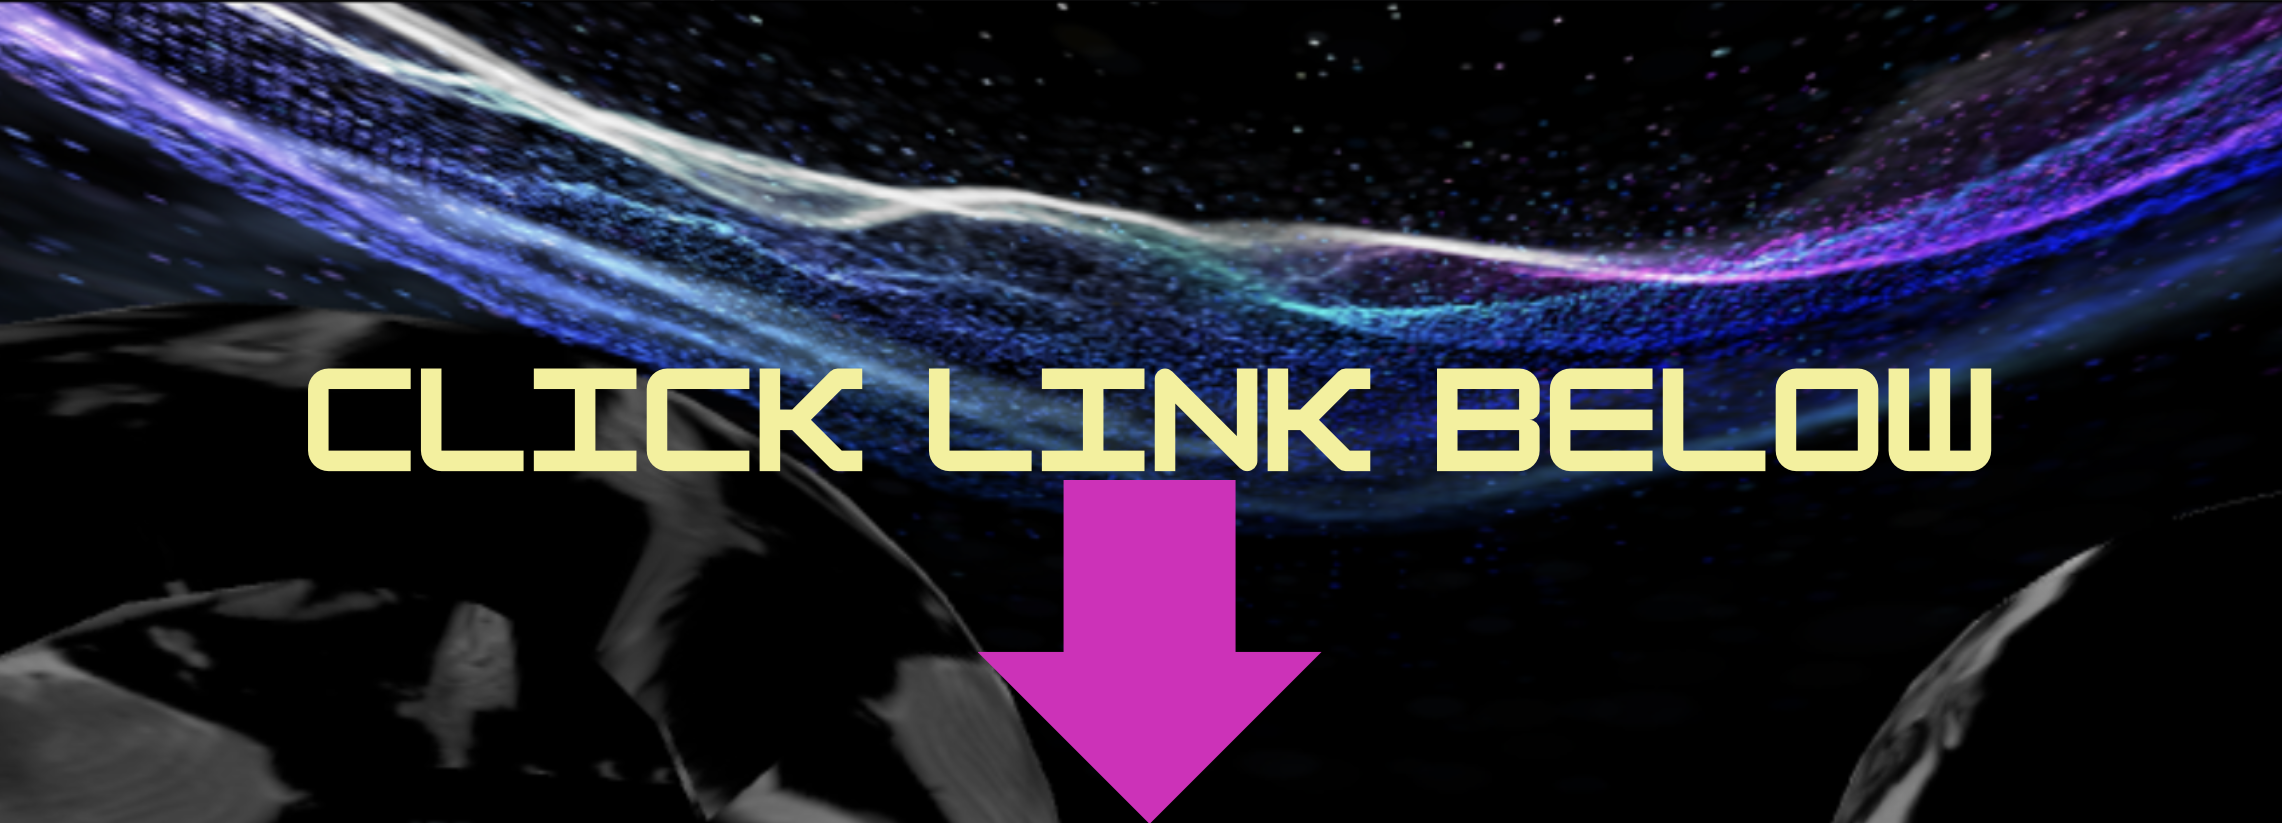 Digital image of black night sky with a banner of glowing purple and azure northern lights. In large computer-y yellow font we read: "CLICK LINK BELOW", as a pink arrow points downward.